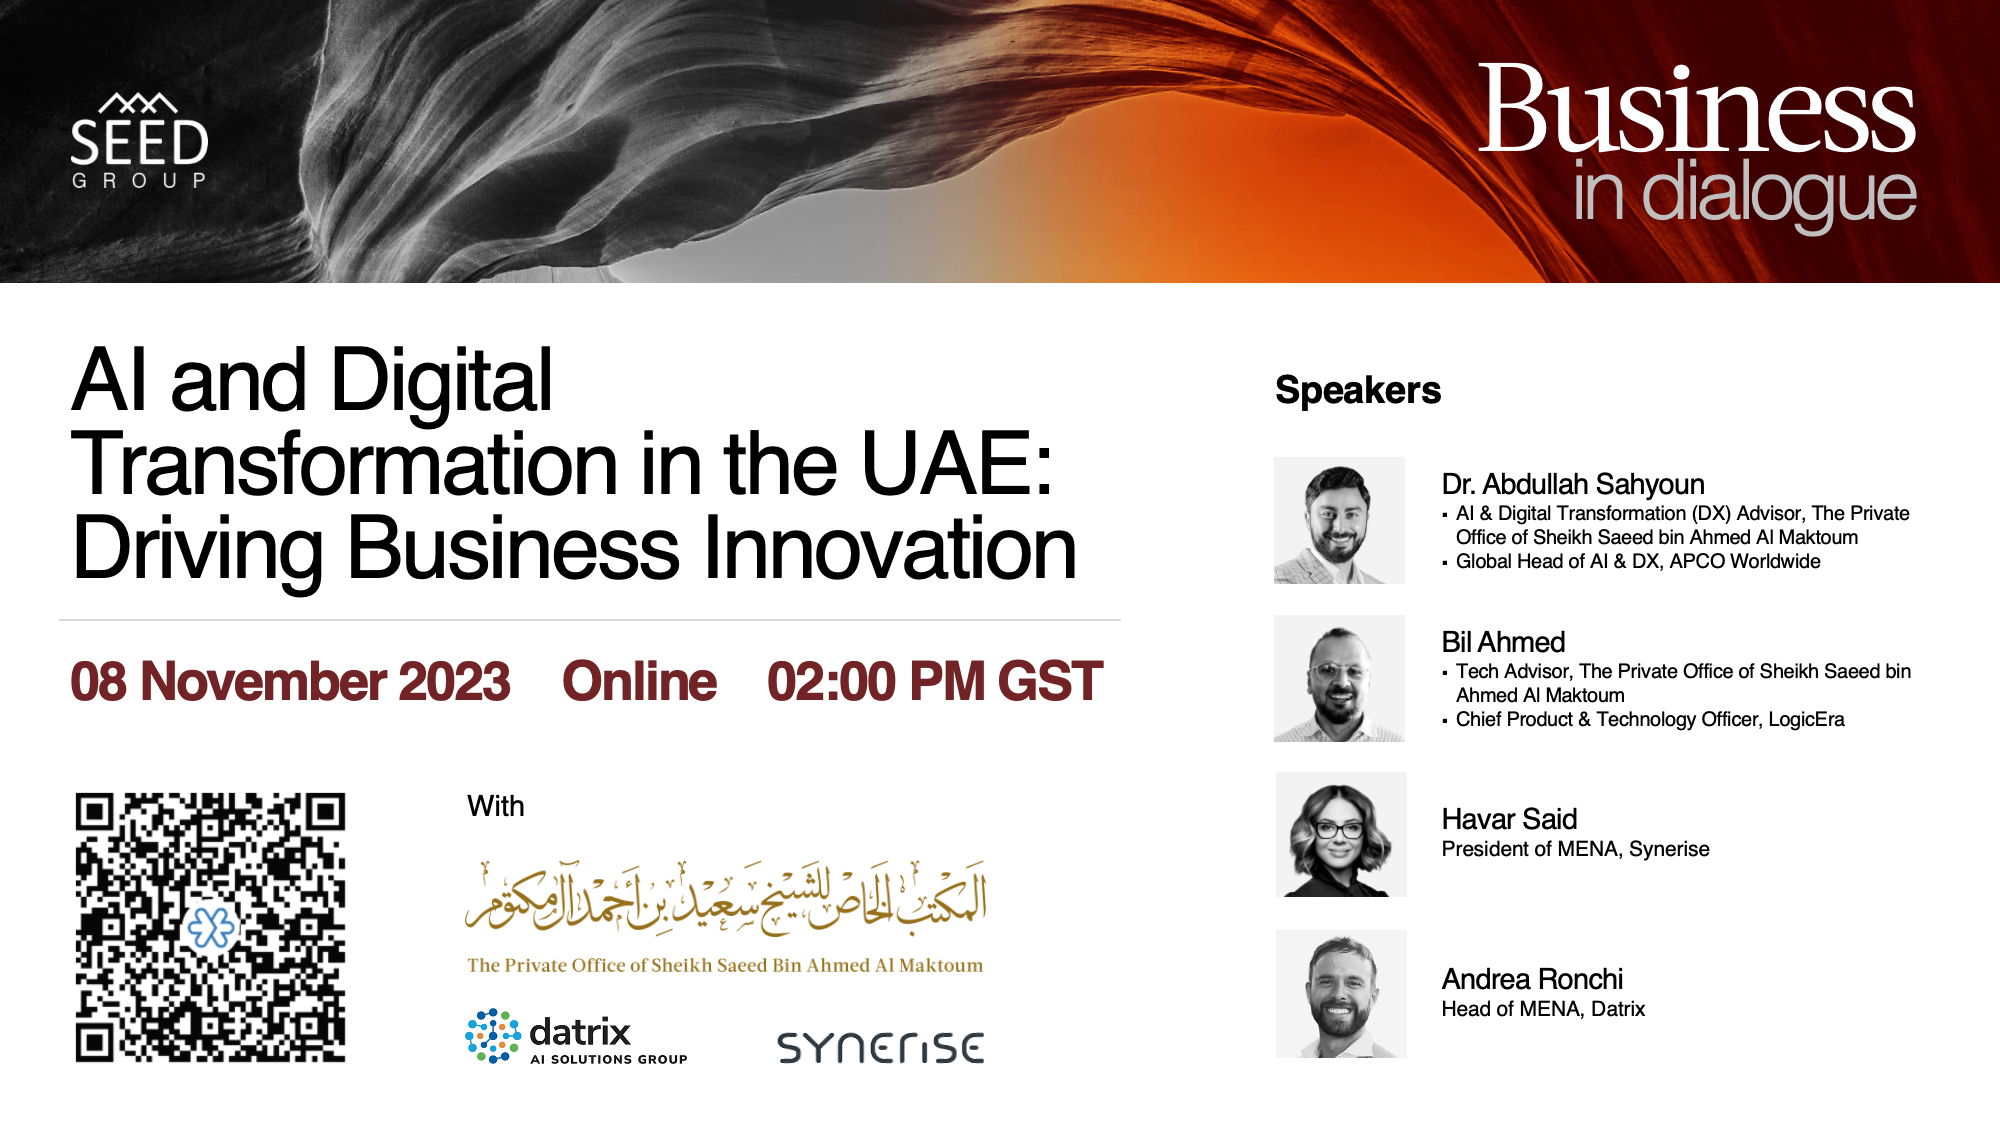 [Webinar] AI and Digital Transformation in the UAE - Driving Business Innovation